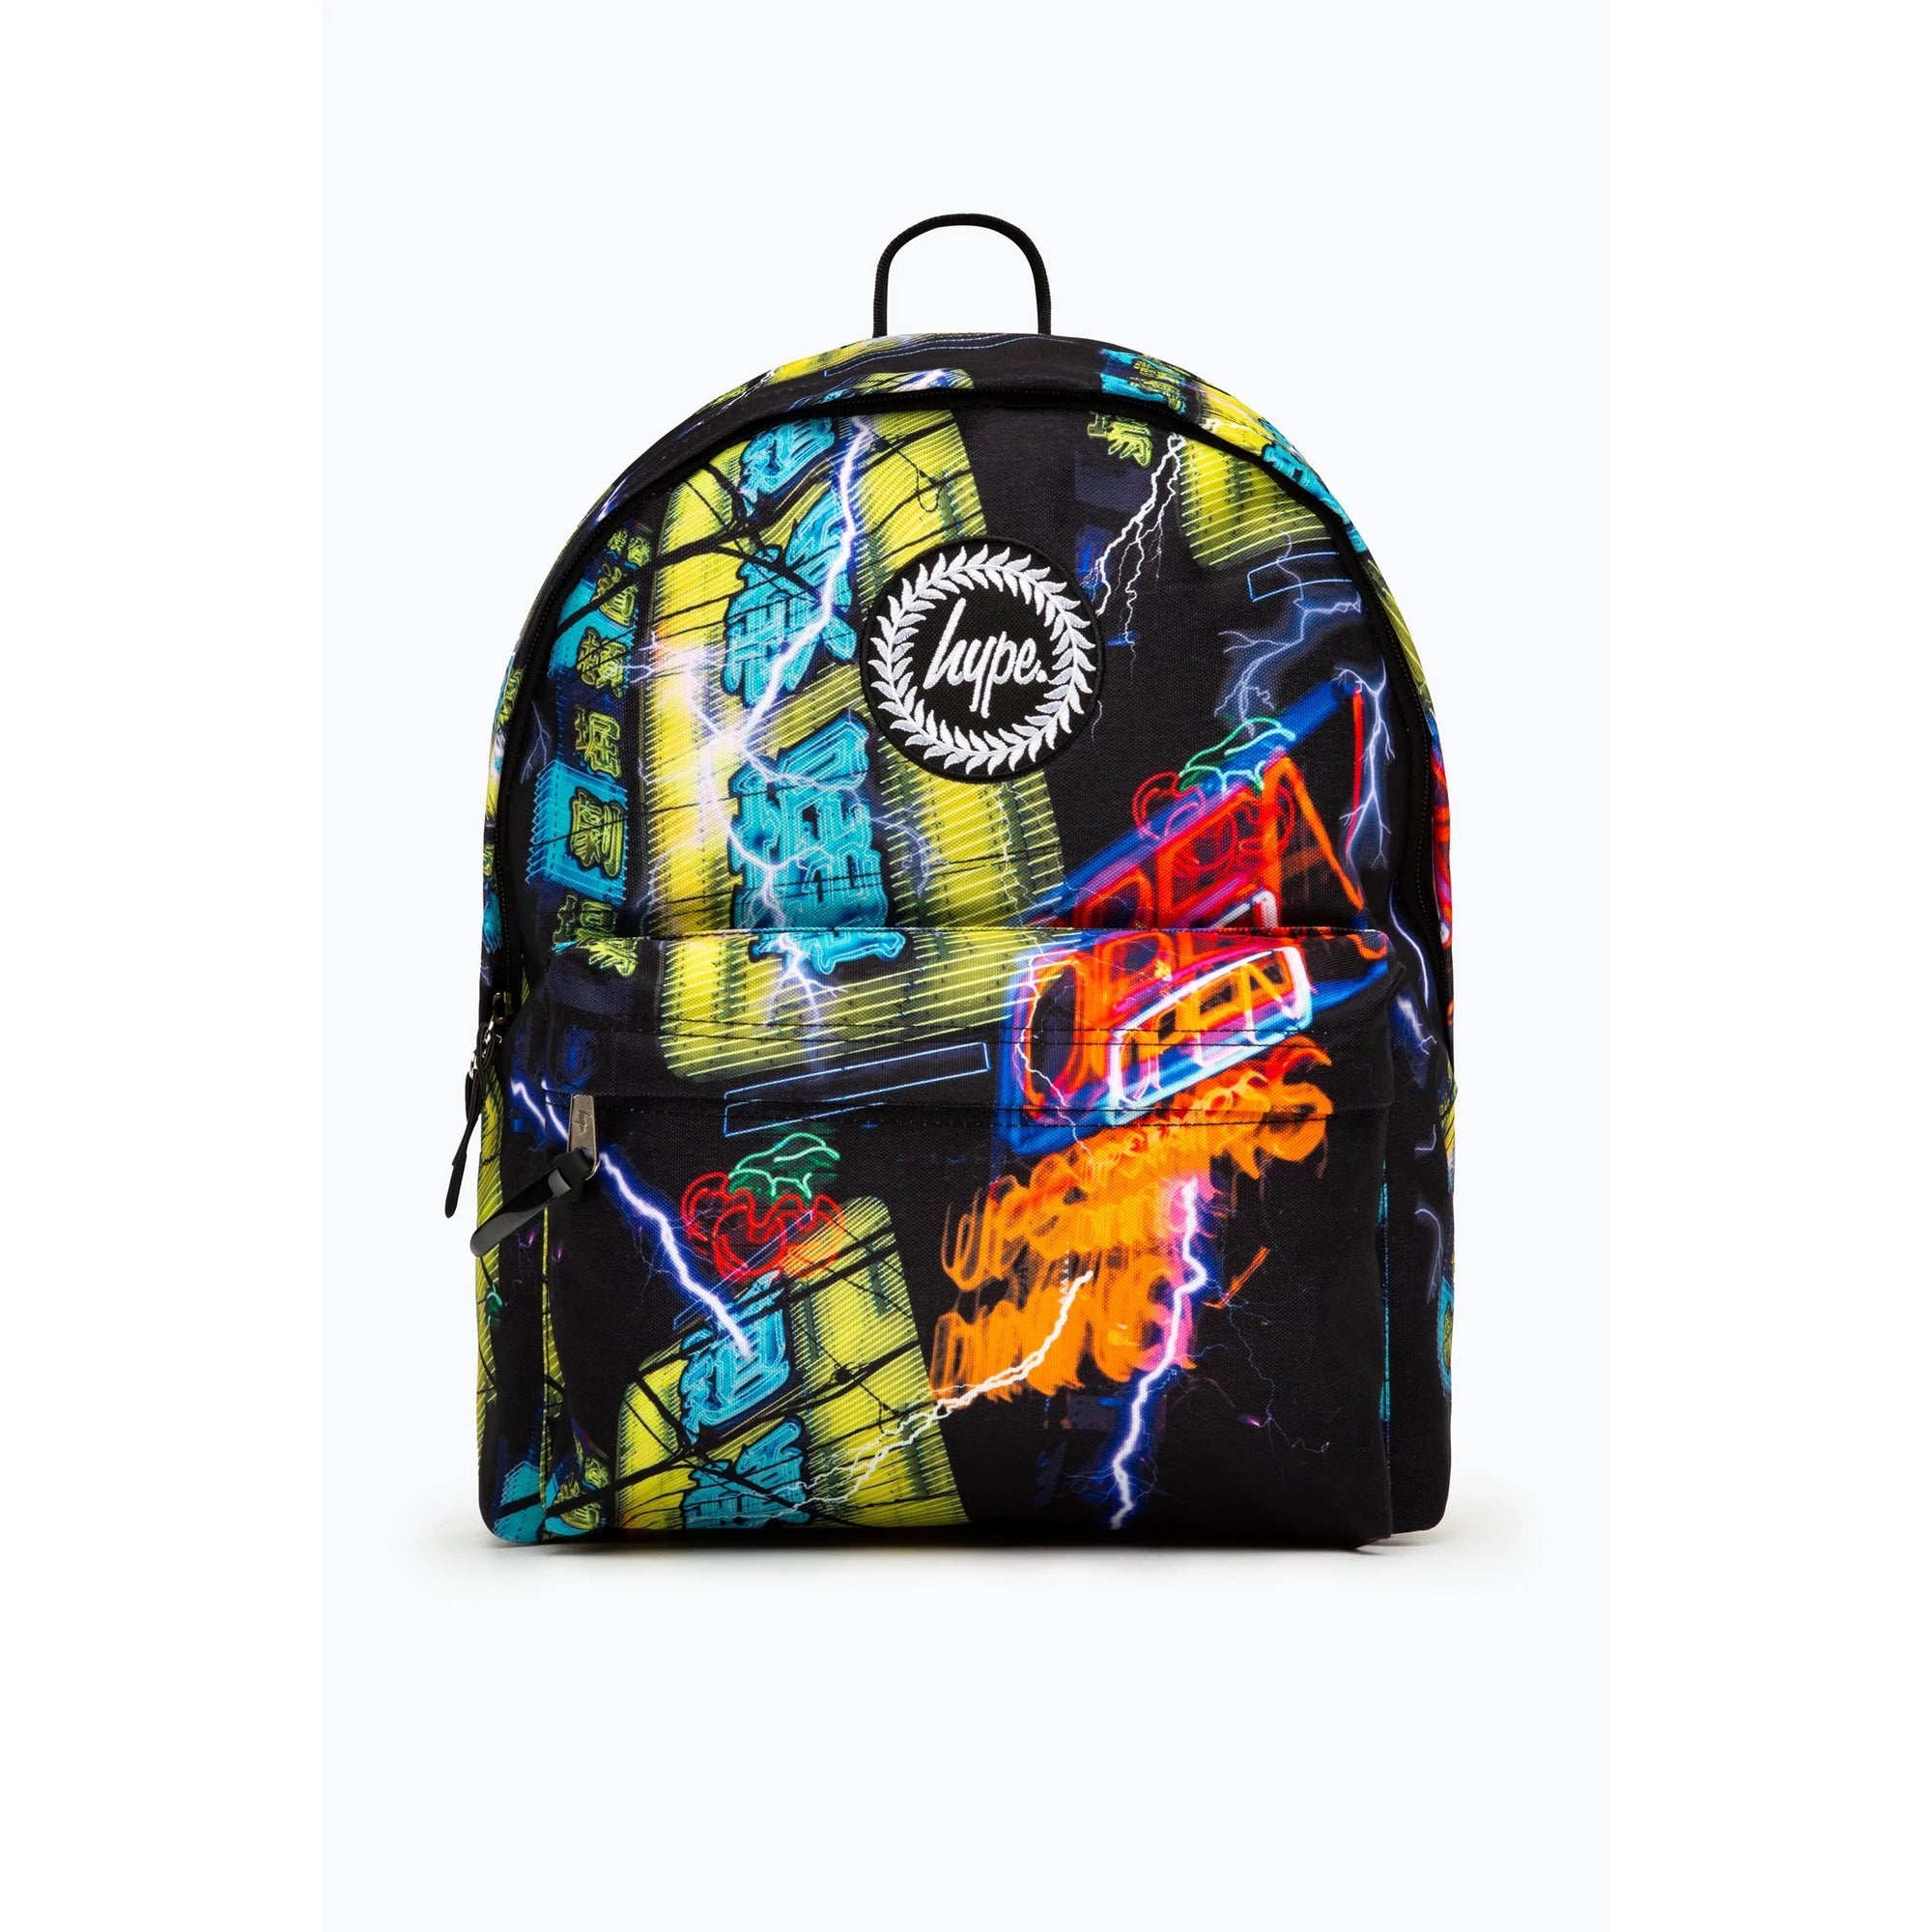 Hype Neon Tokyo Backpack Twlg-741 Accessories ONE SIZE / Multi